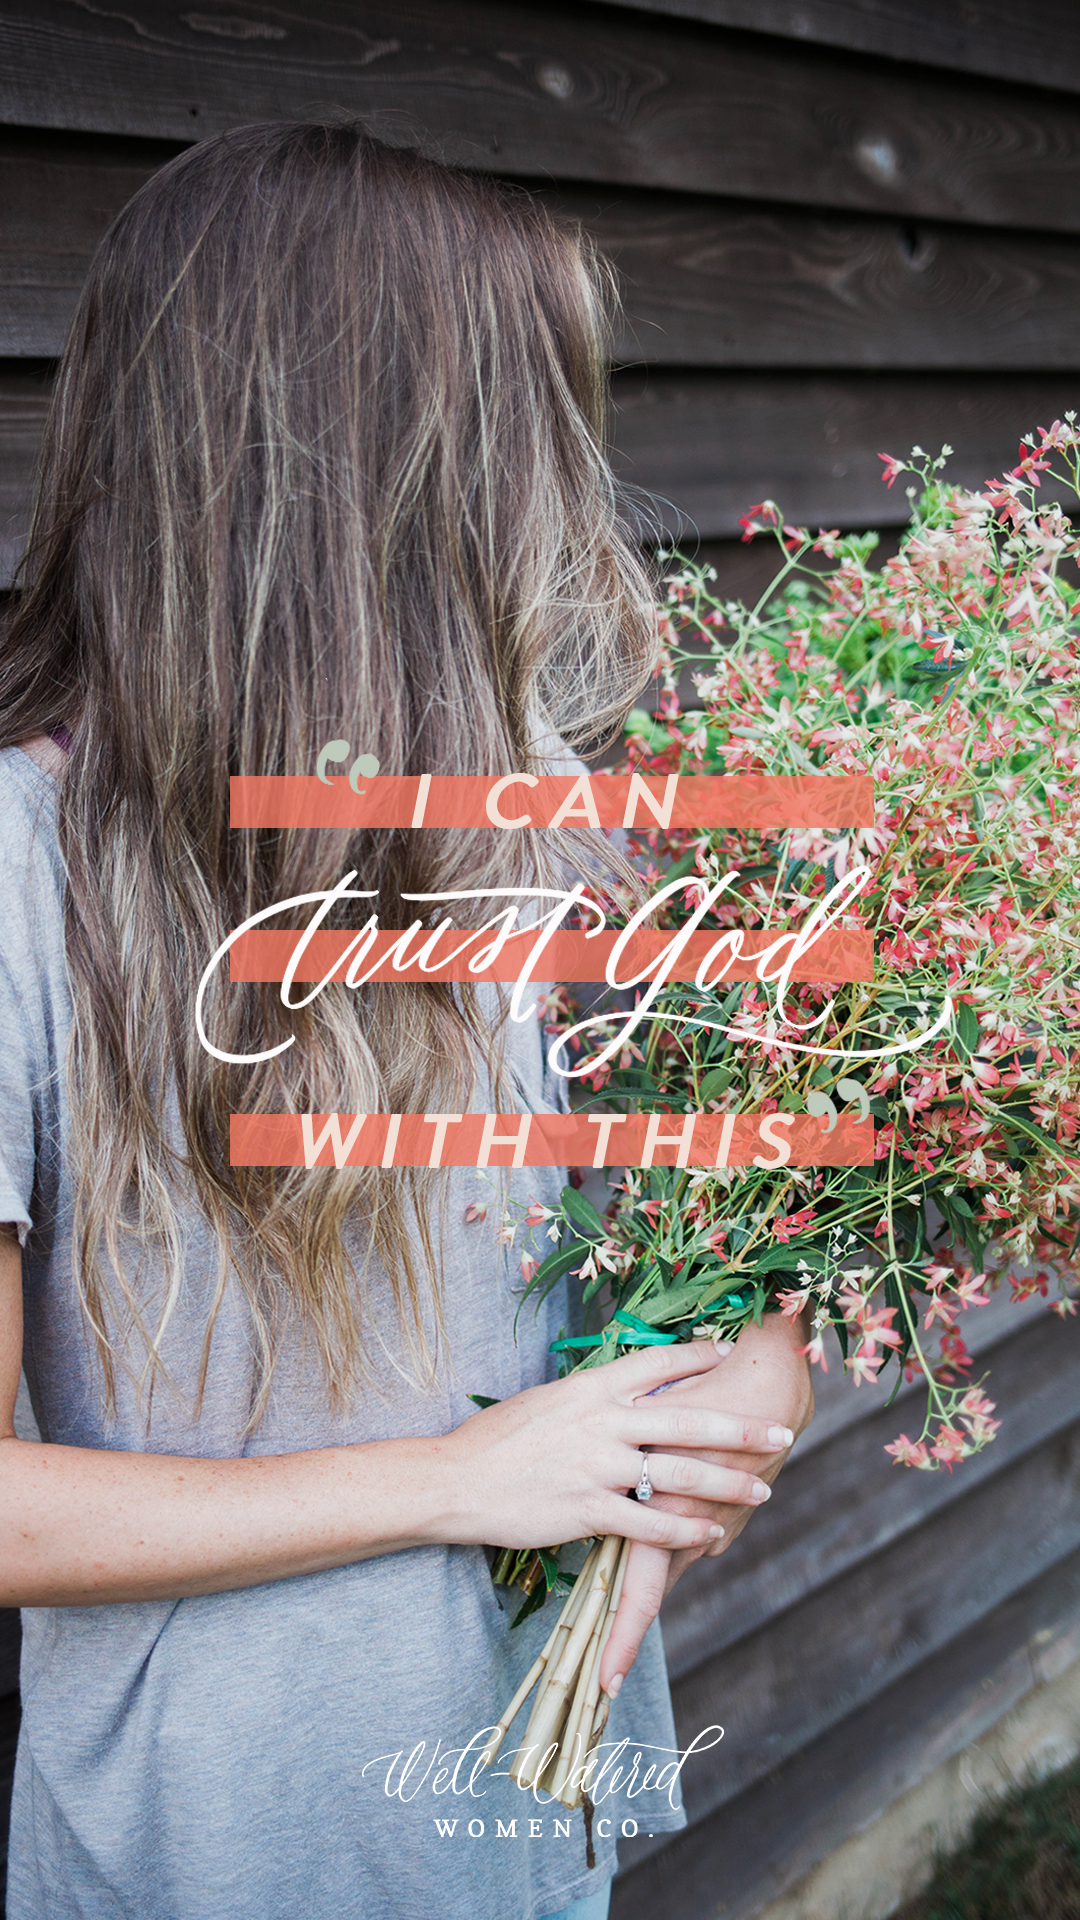 Well-Watered Women Blog: Unchanging Seasons | I can trust God with this.